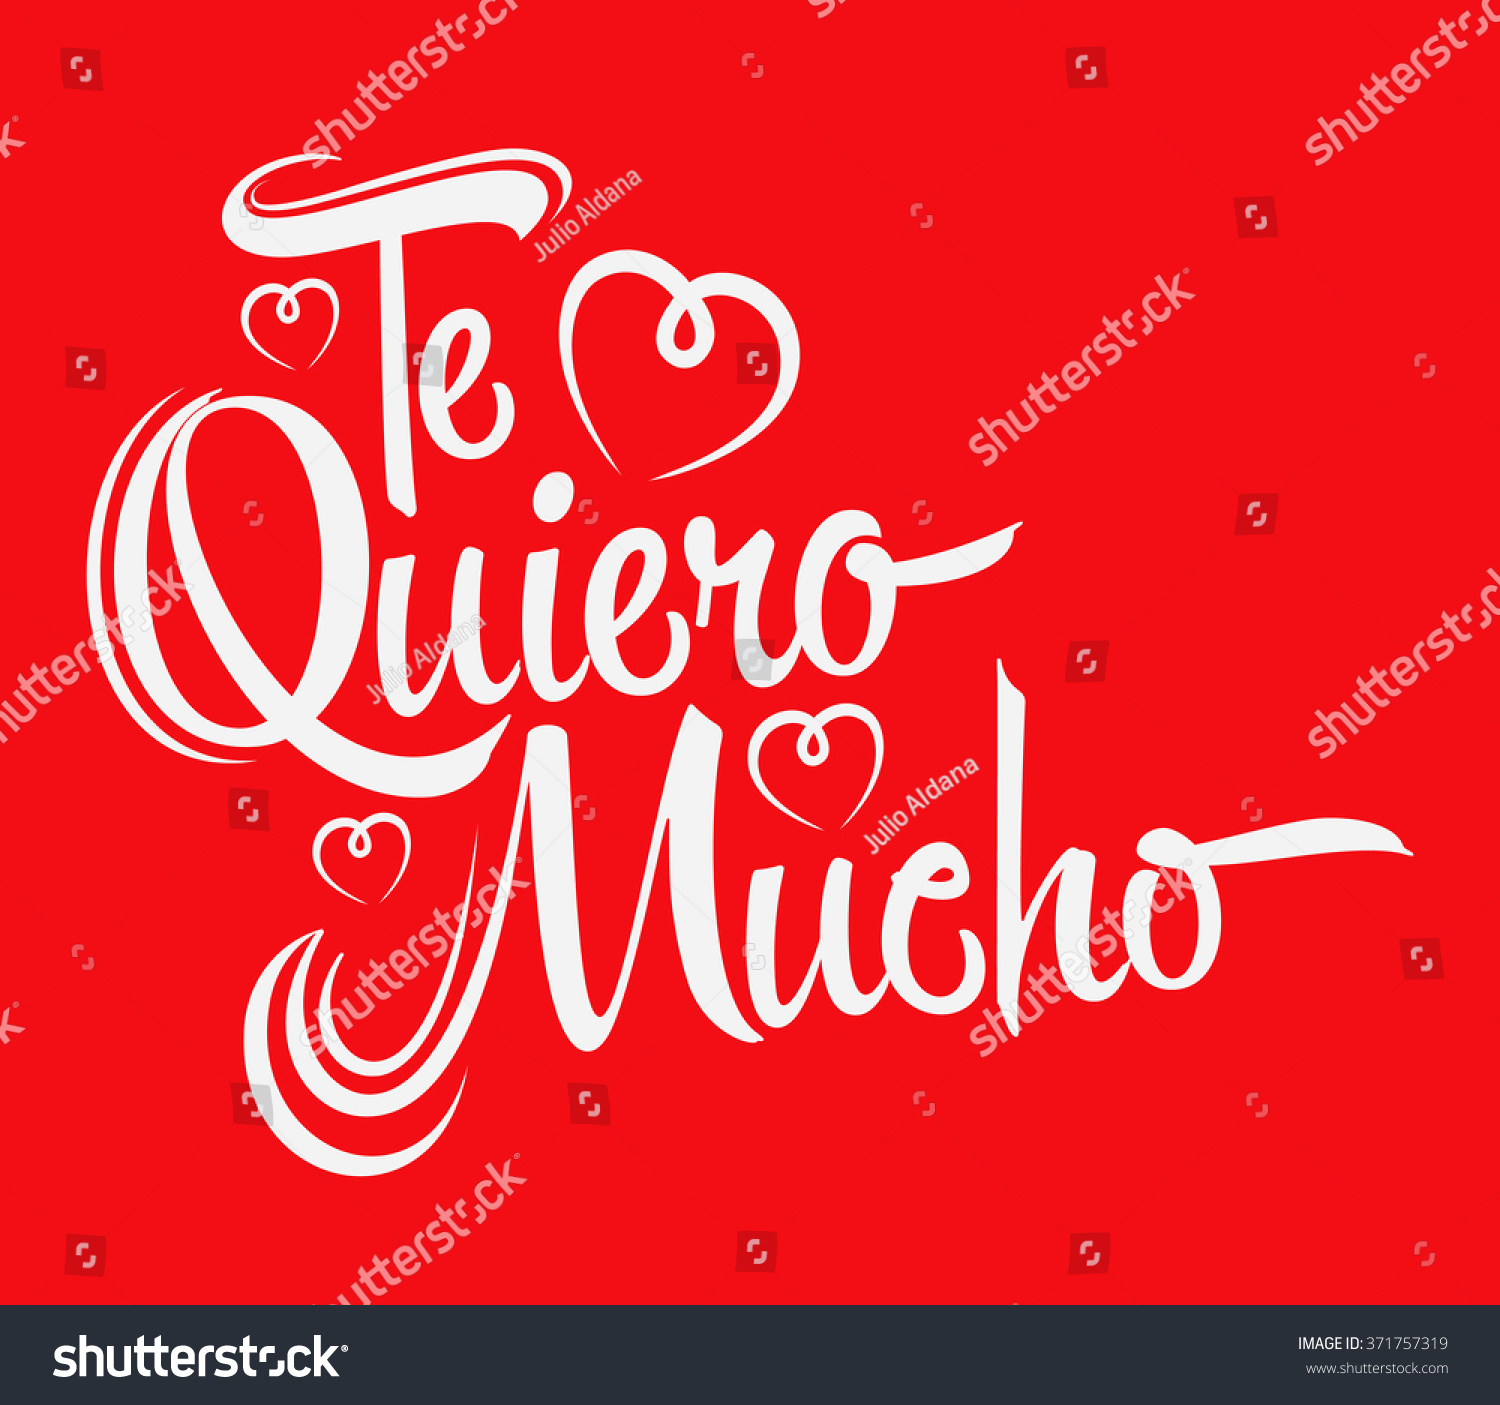 Te Quiero Mucho - I Love You So Much Spanish Text, Vector Lettering ...